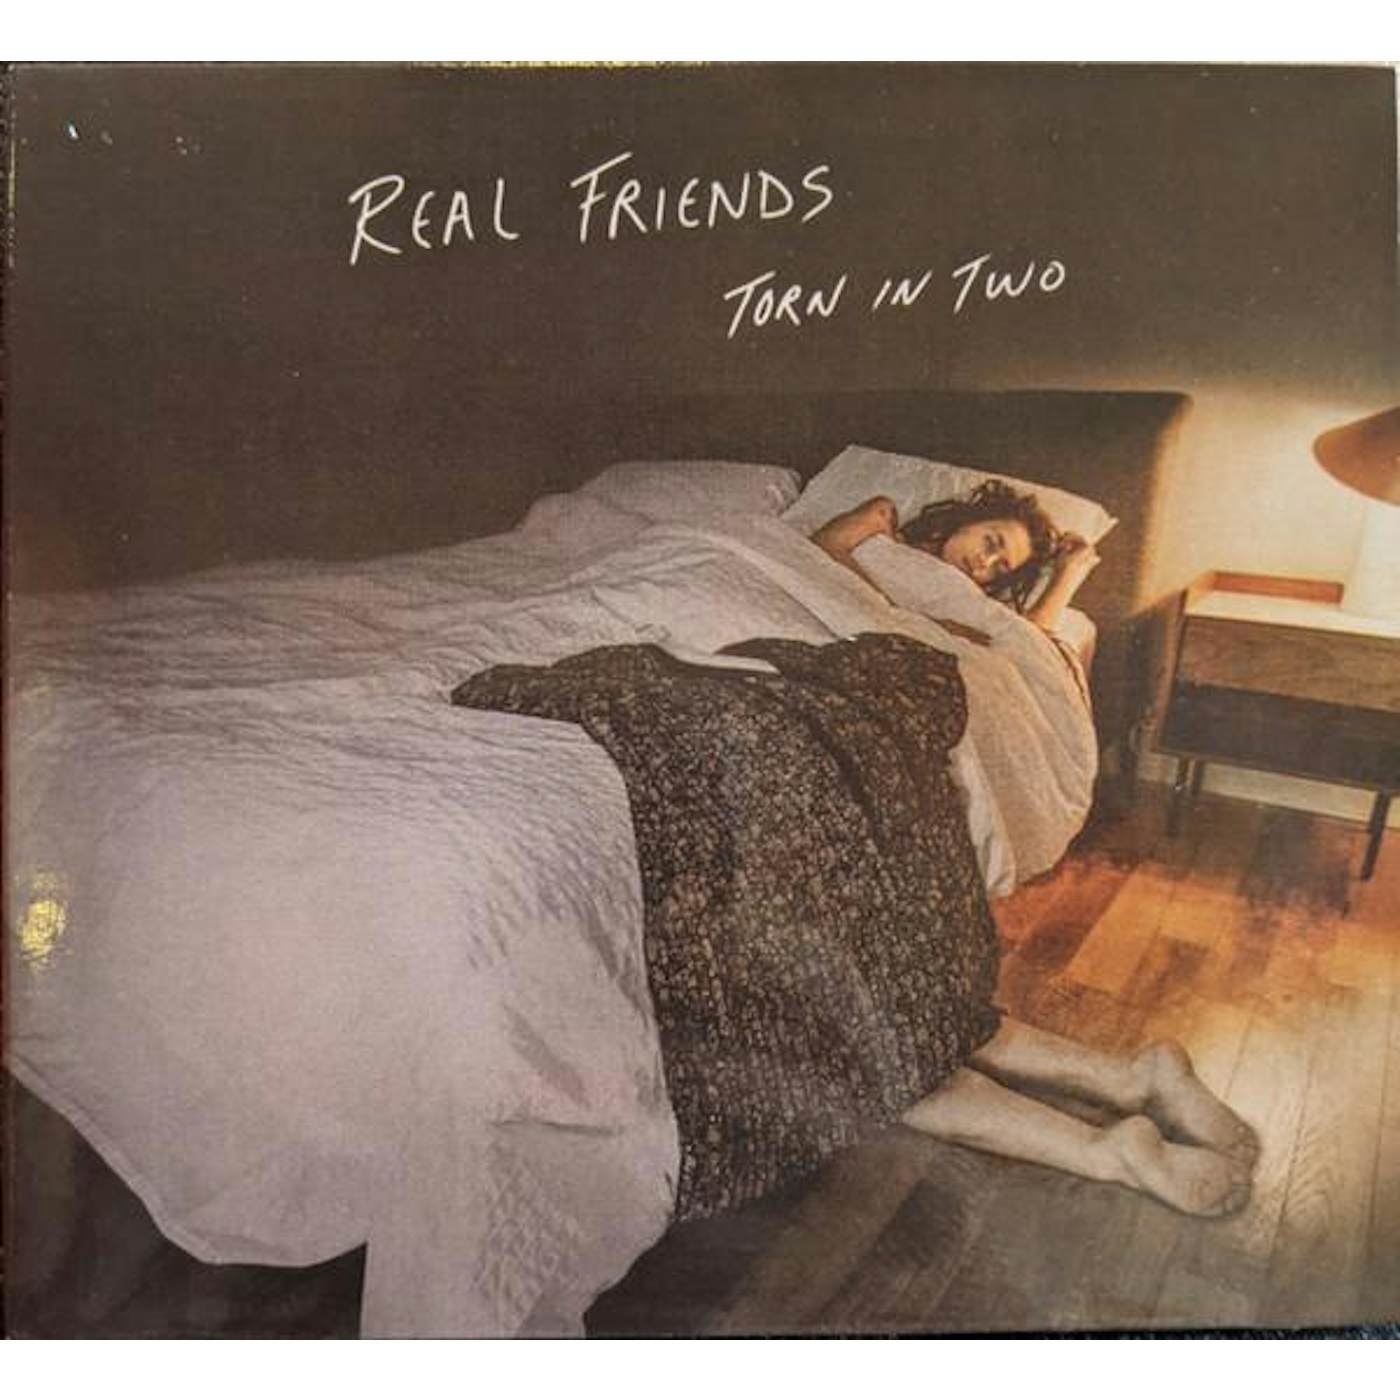 Real Friends Torn in Two Vinyl Record